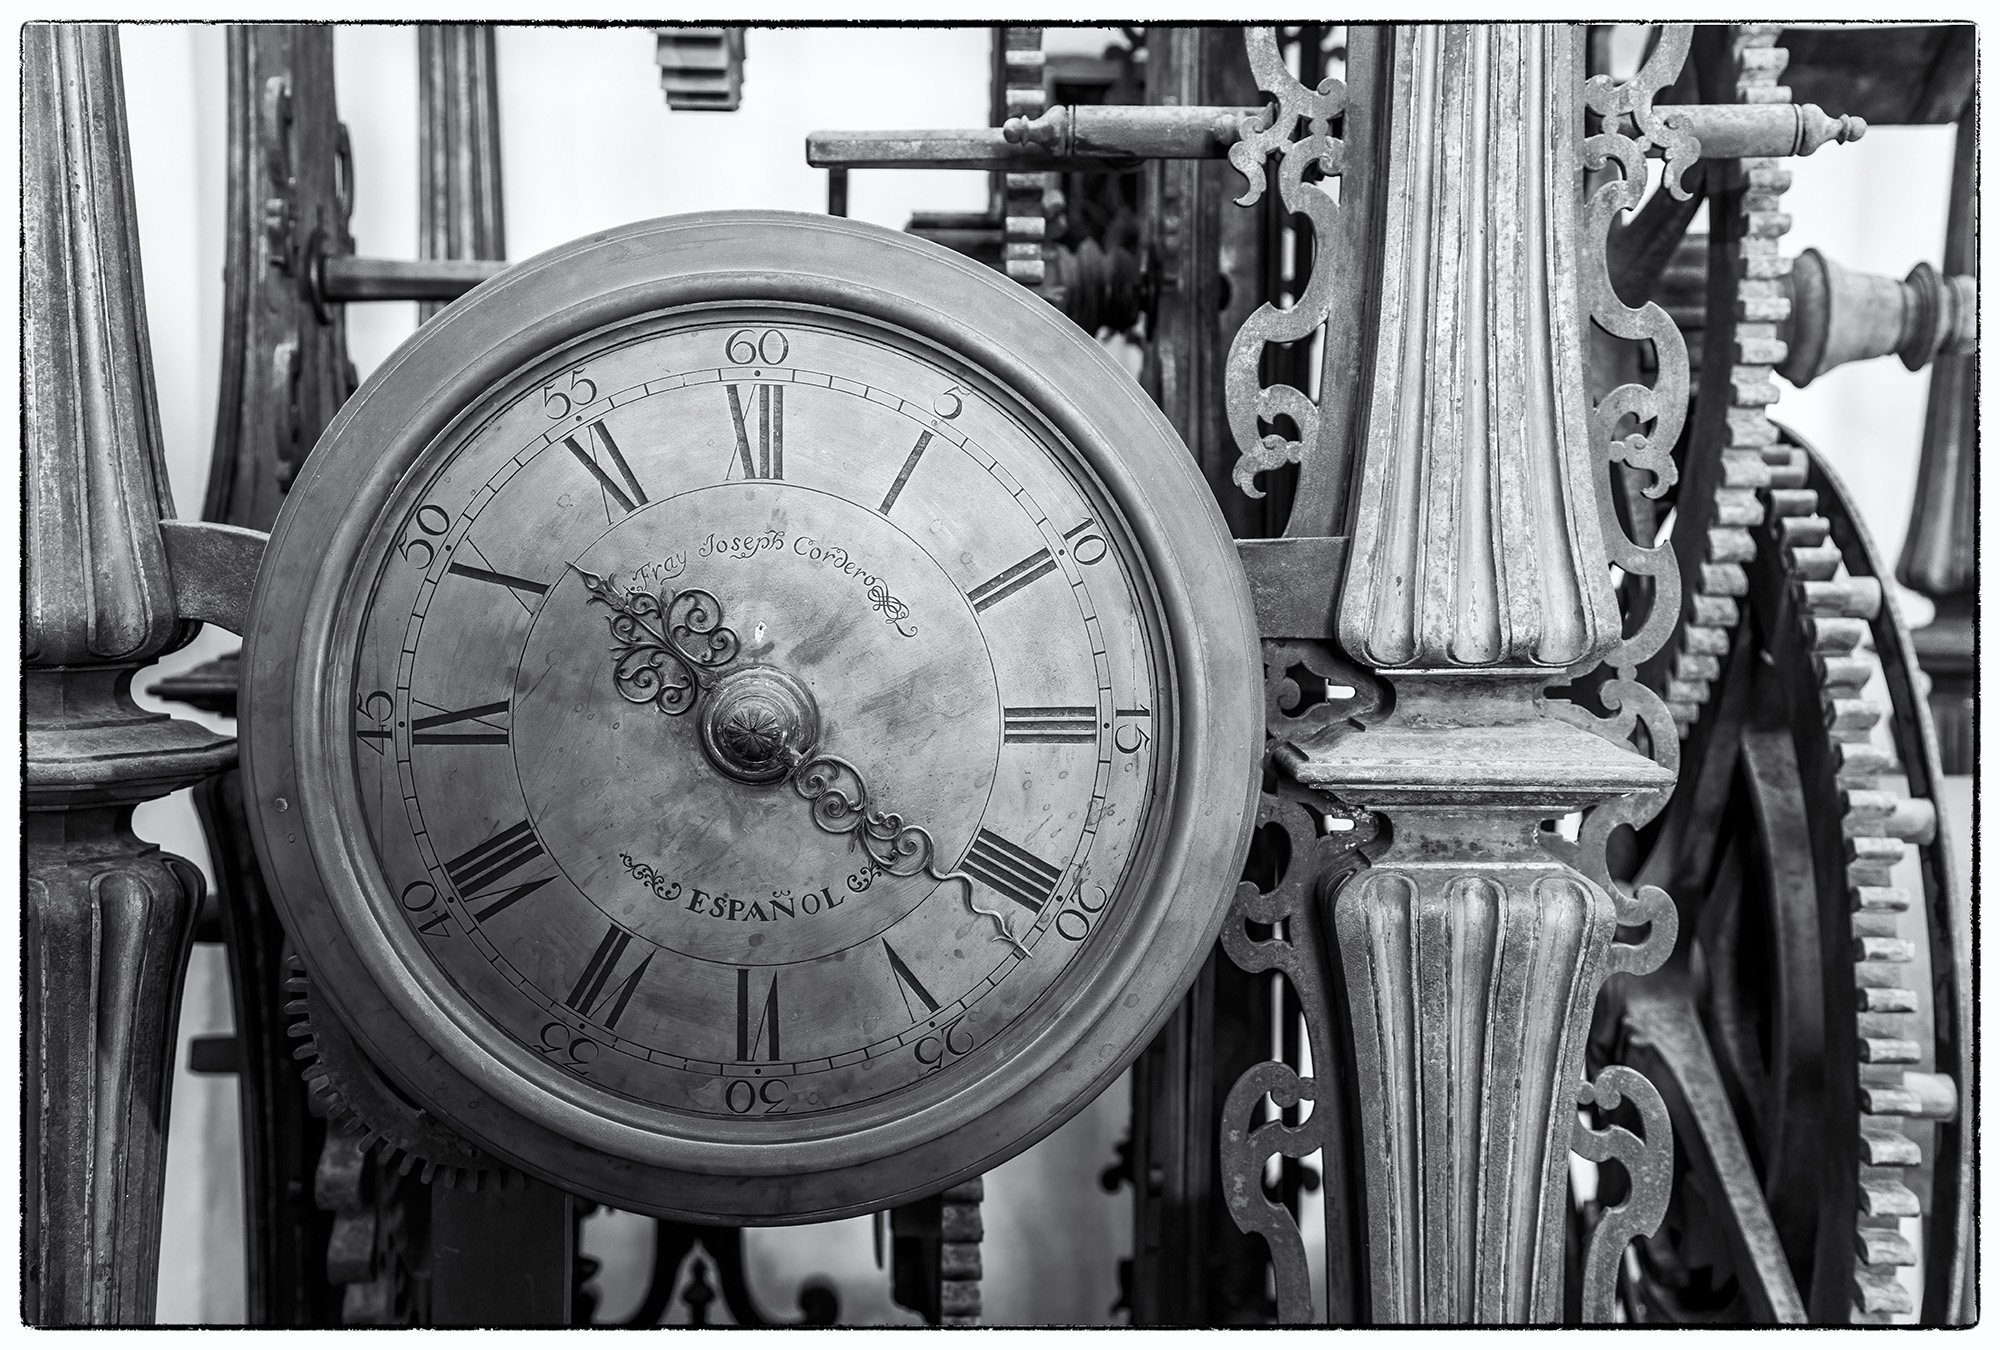 This black and white photograph, discovered in the heart of Sevilla, Spain, showcases the intricate beauty of a timeless clock...